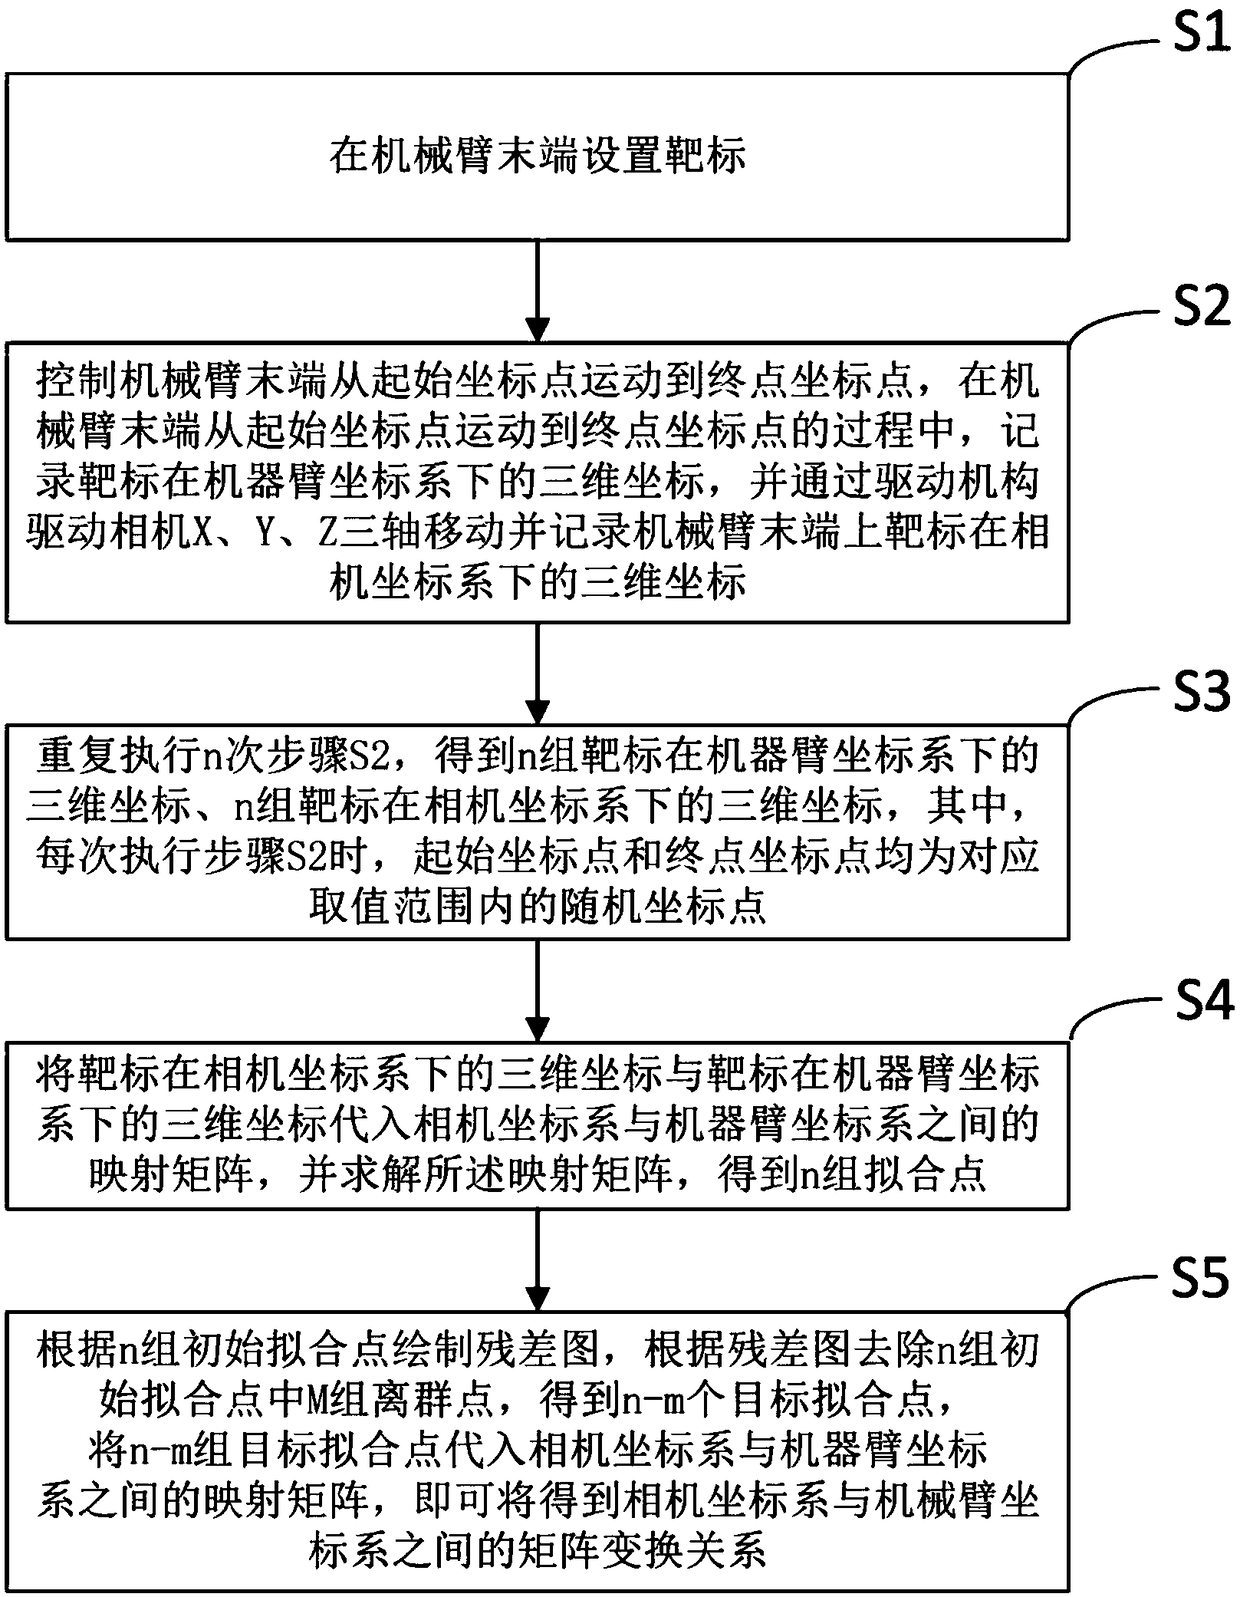 Hand-eye calibration and coordinate conversion method